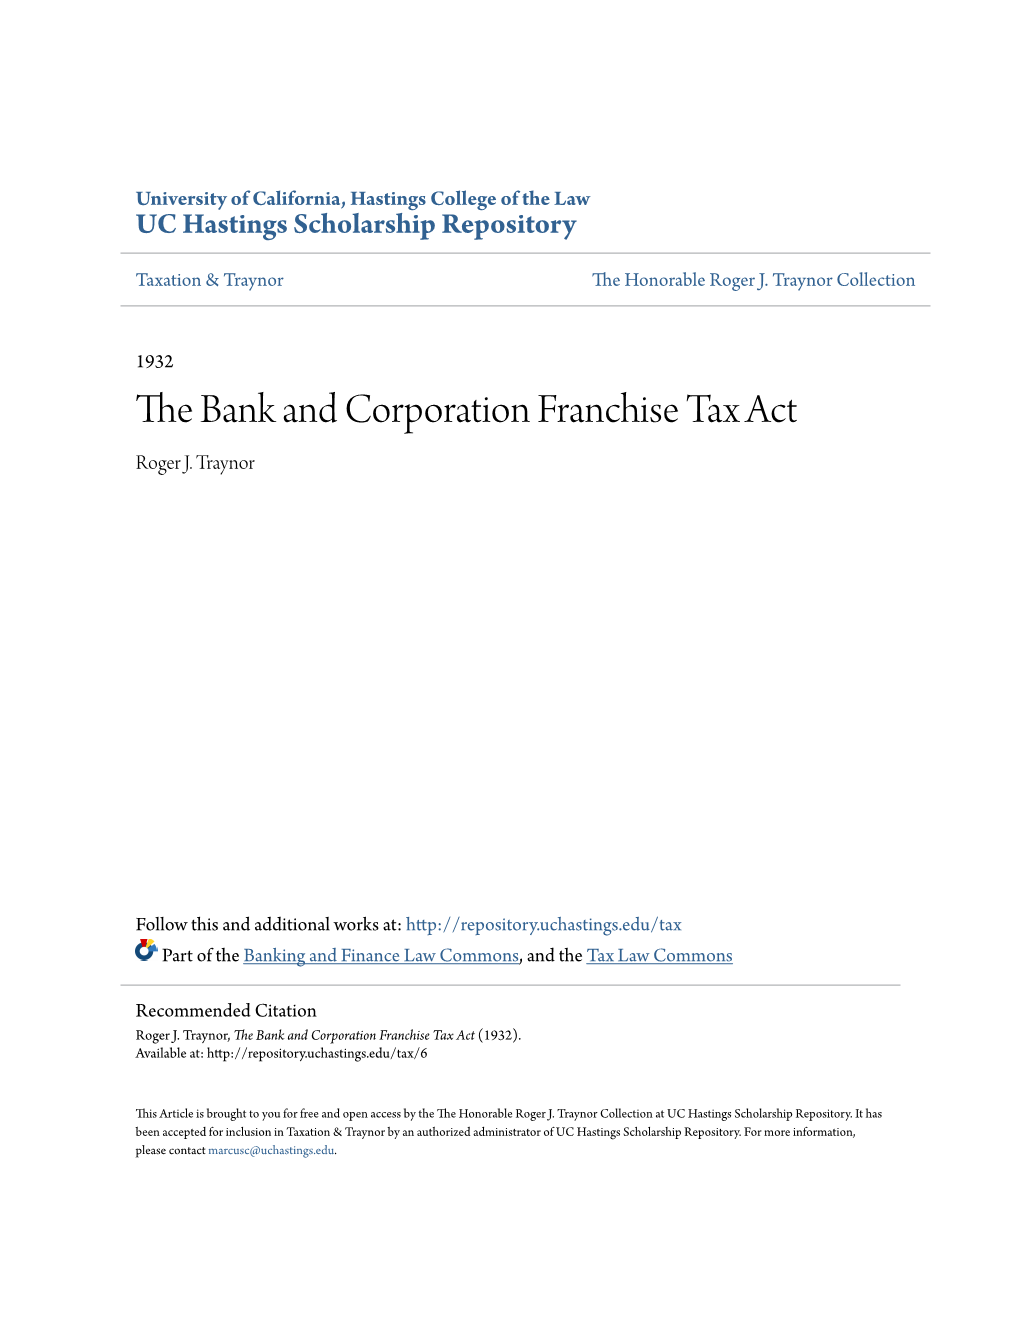 The Bank and Corporation Franchise Tax Act (1932)